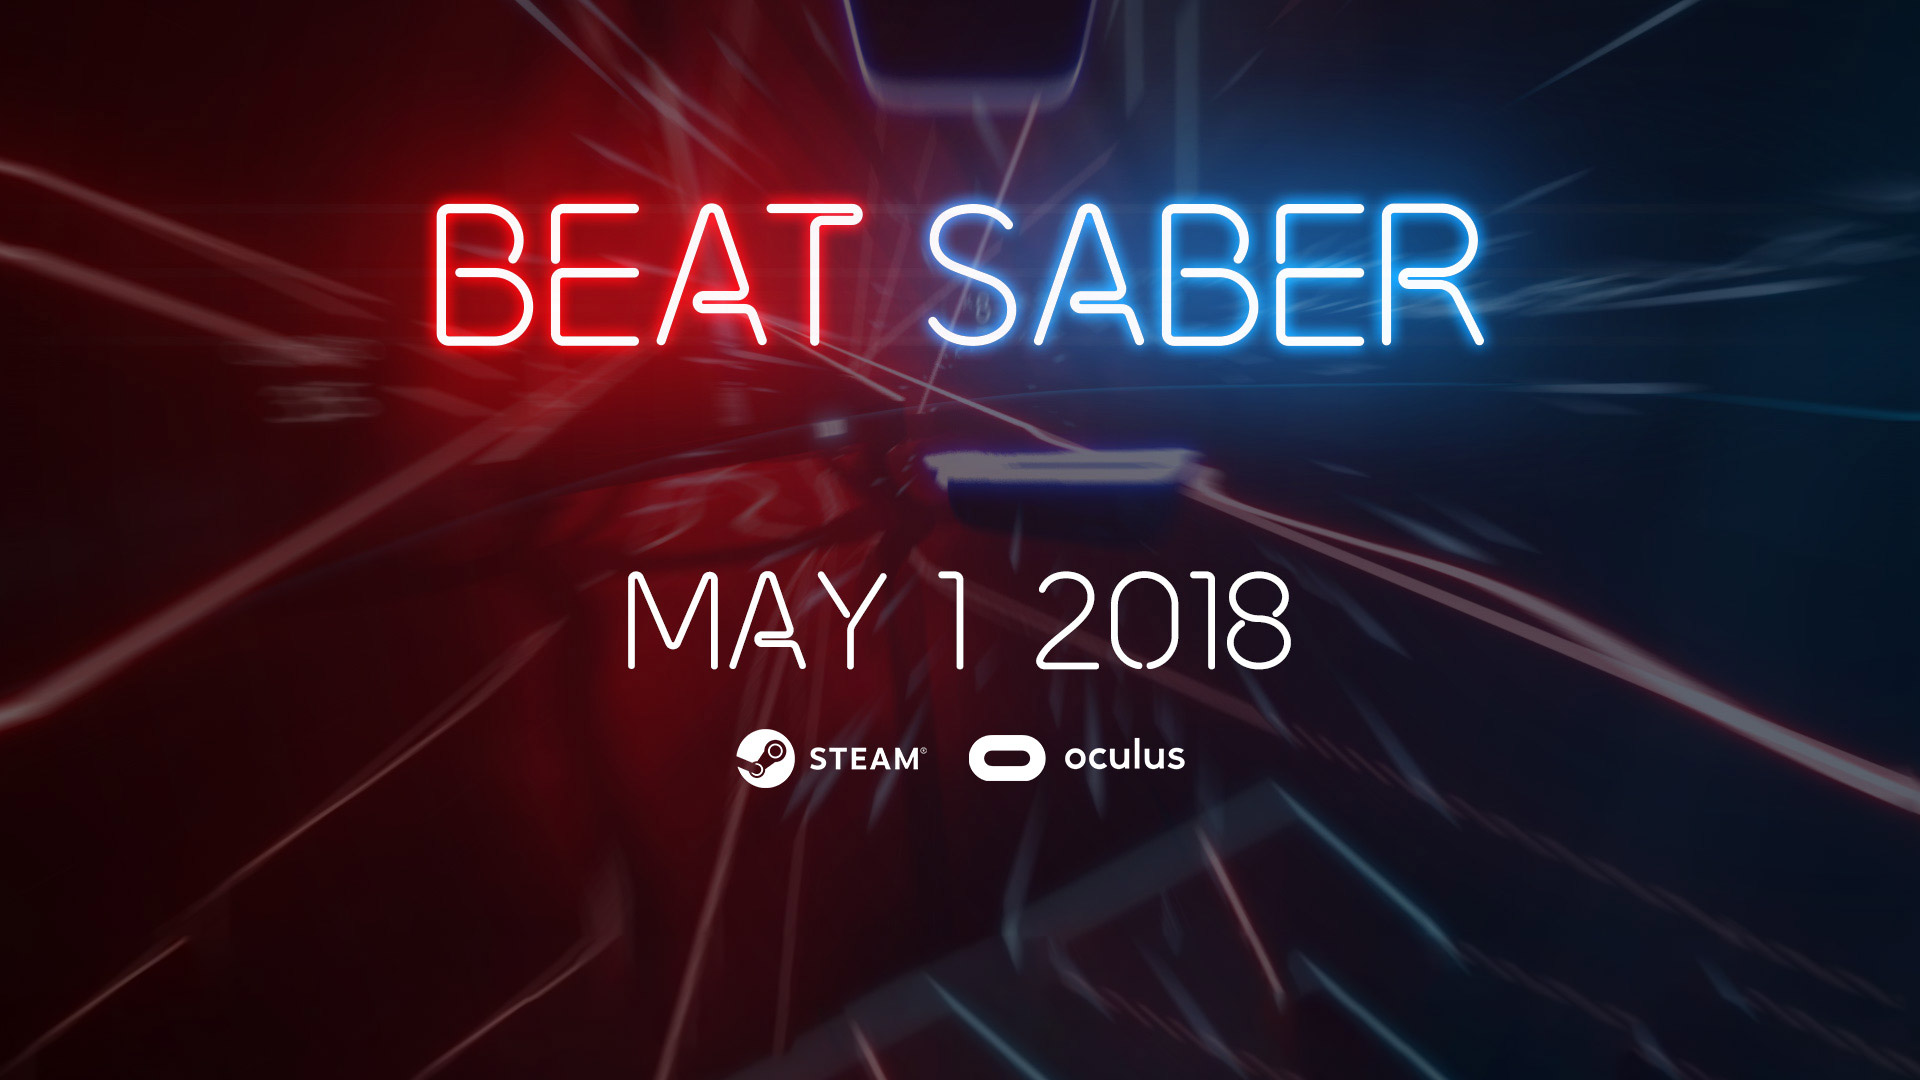 Miniature Beat Saber Concept Offers a Peek into the Future of AR Games   Road to VR